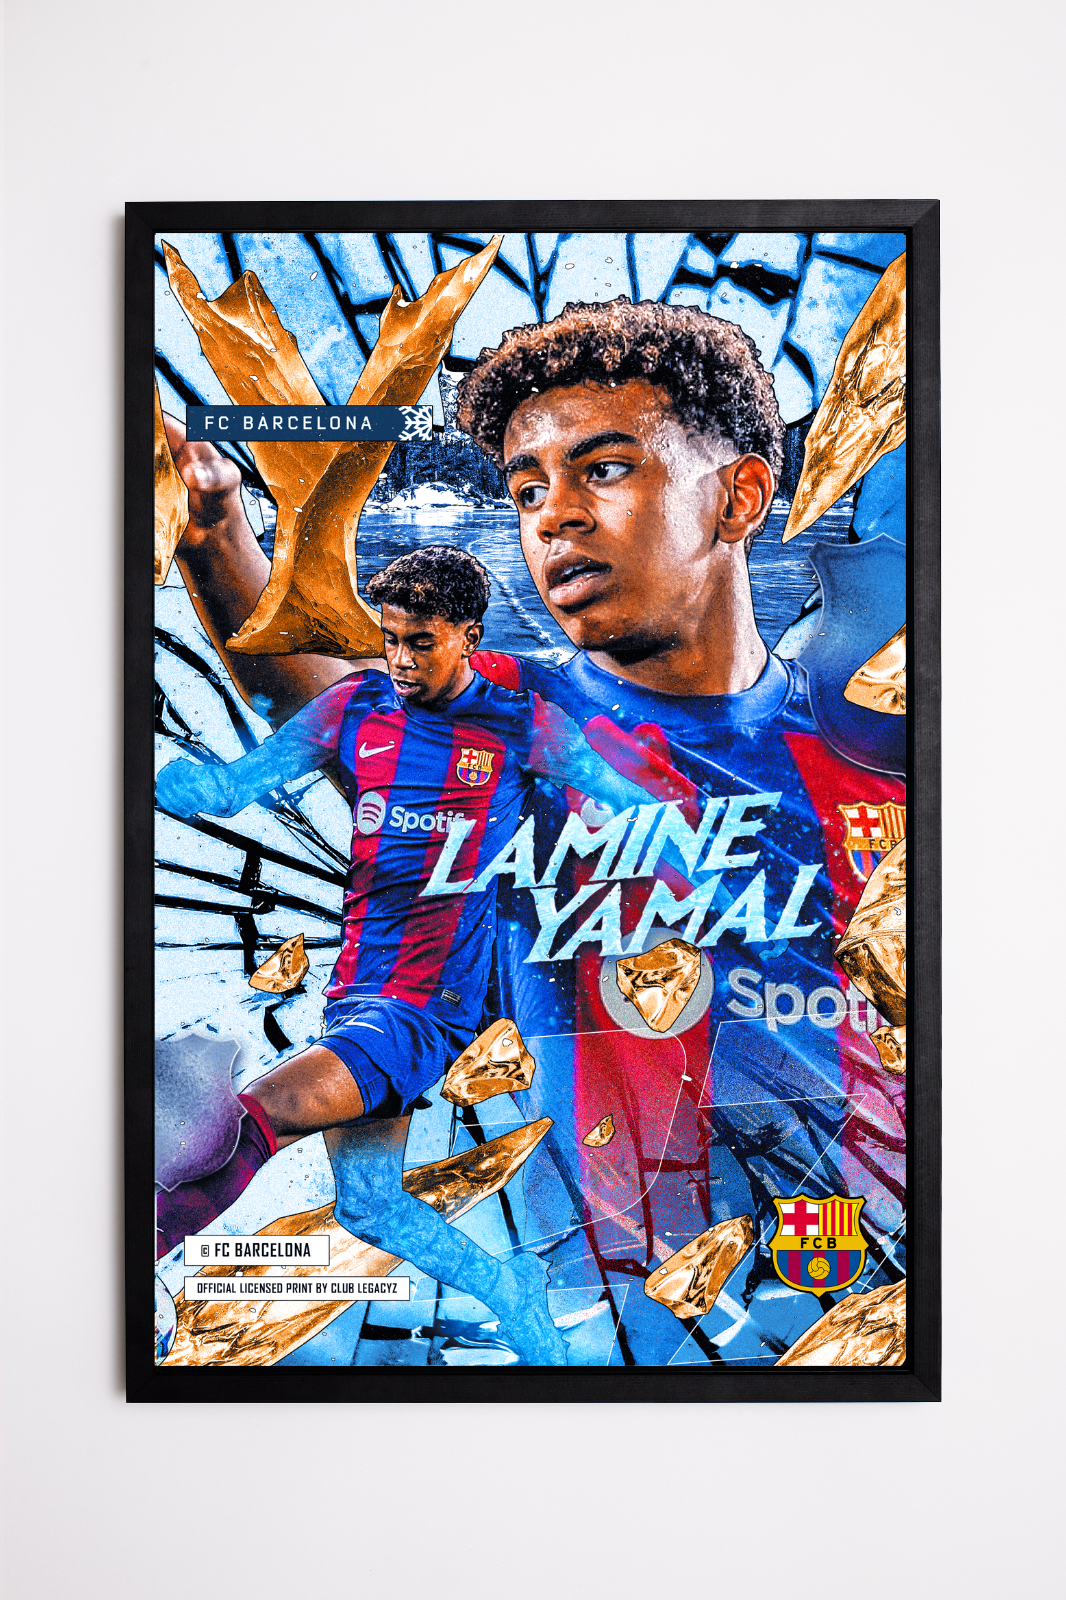 FC Barcelona - Lamine Yamal Frozen poster limited to 100